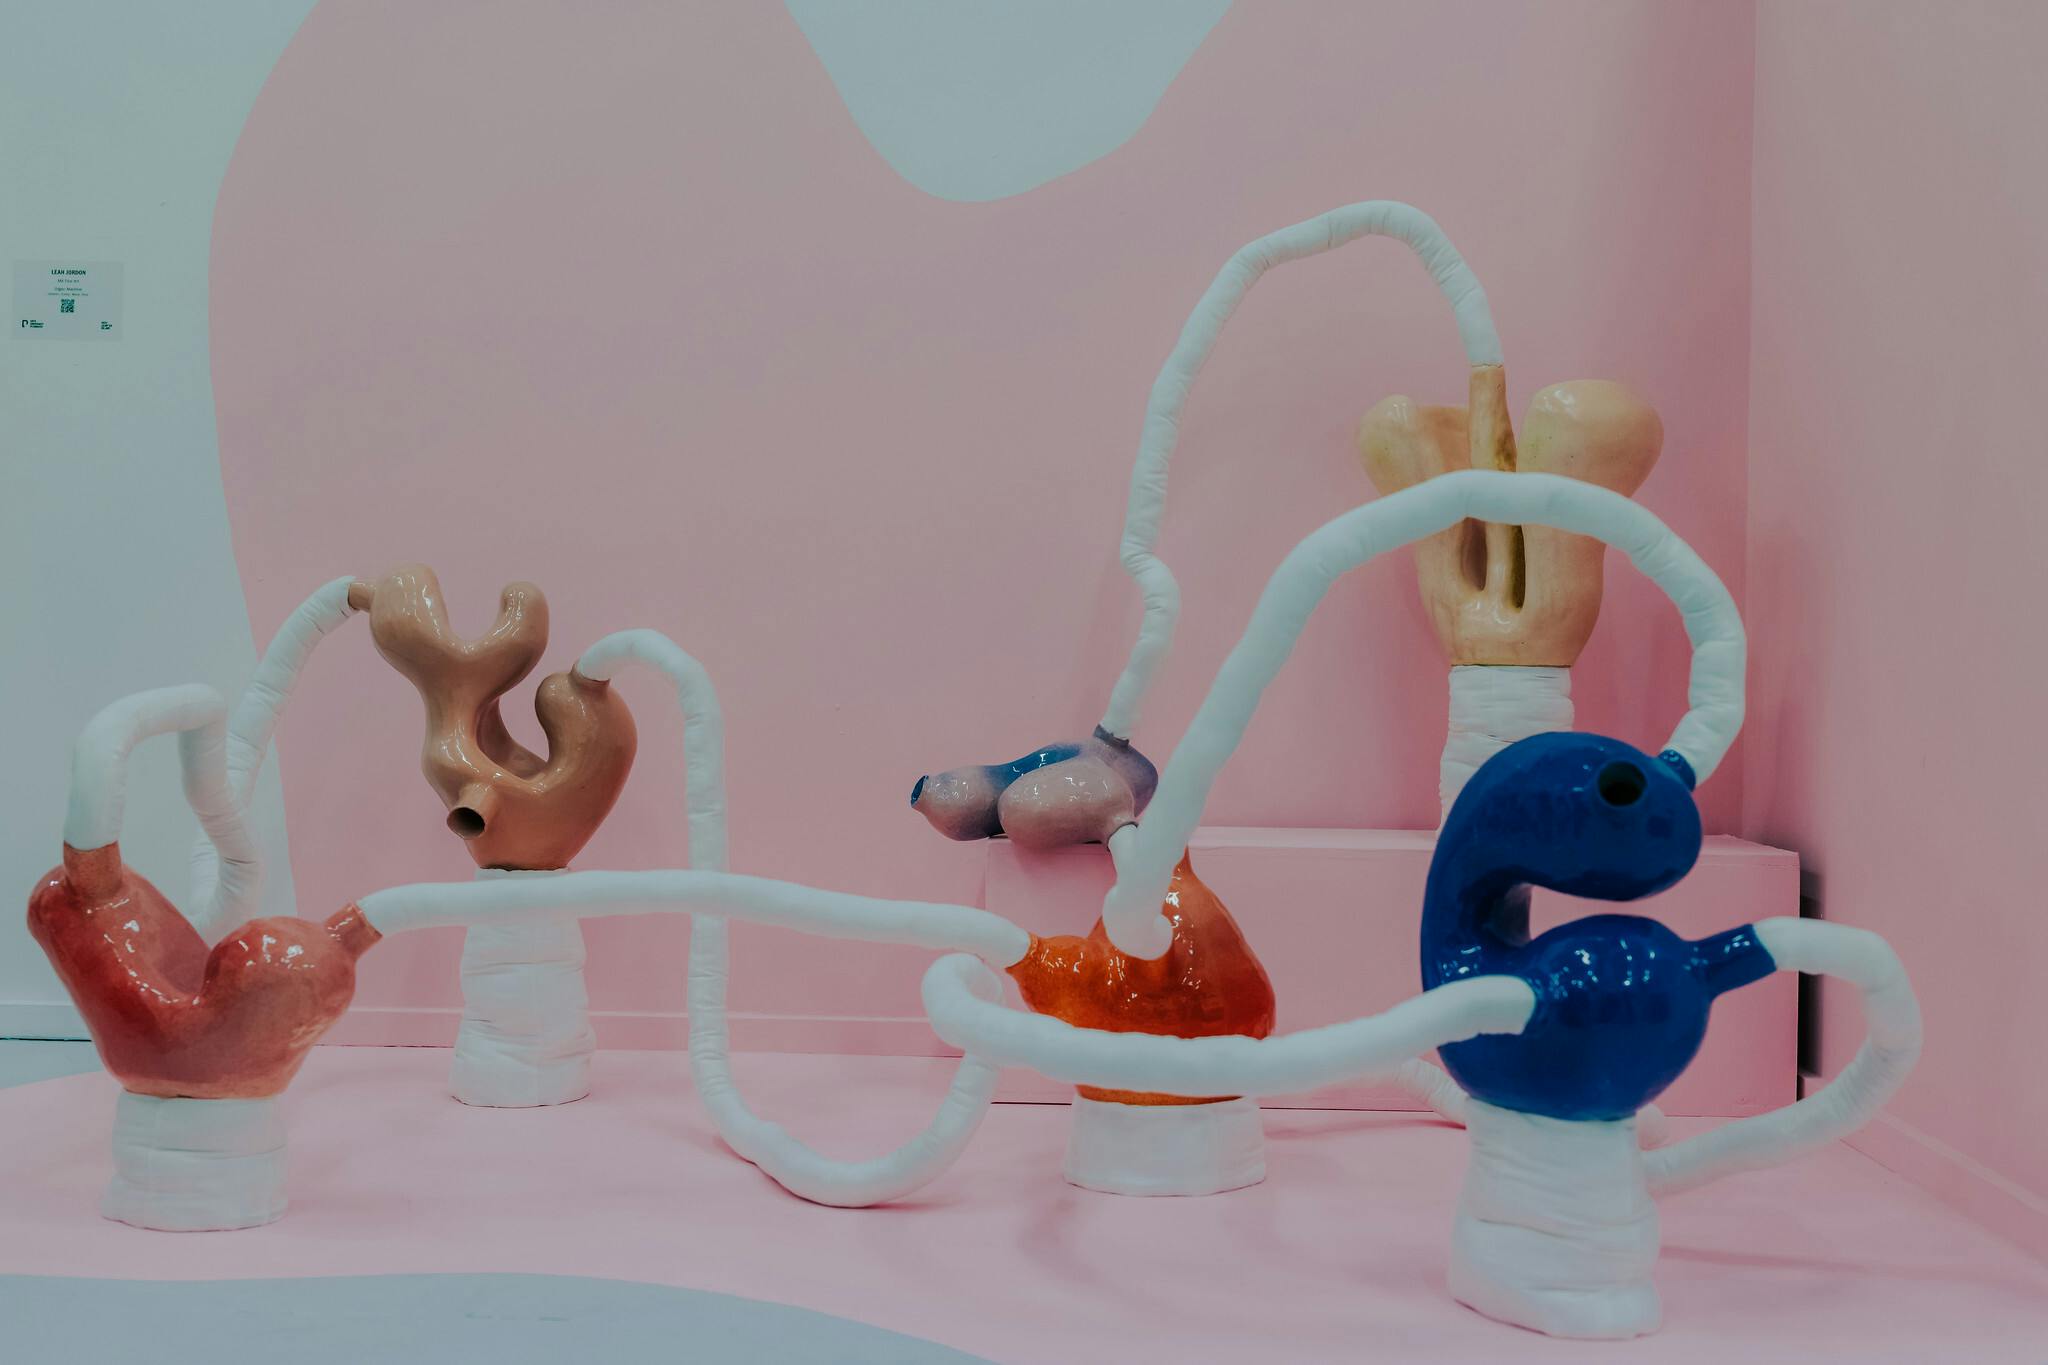 A number of sculptured items that are brightly coloured red and blue and yellow with long white tubes coming out of the shapes against a pale pink background